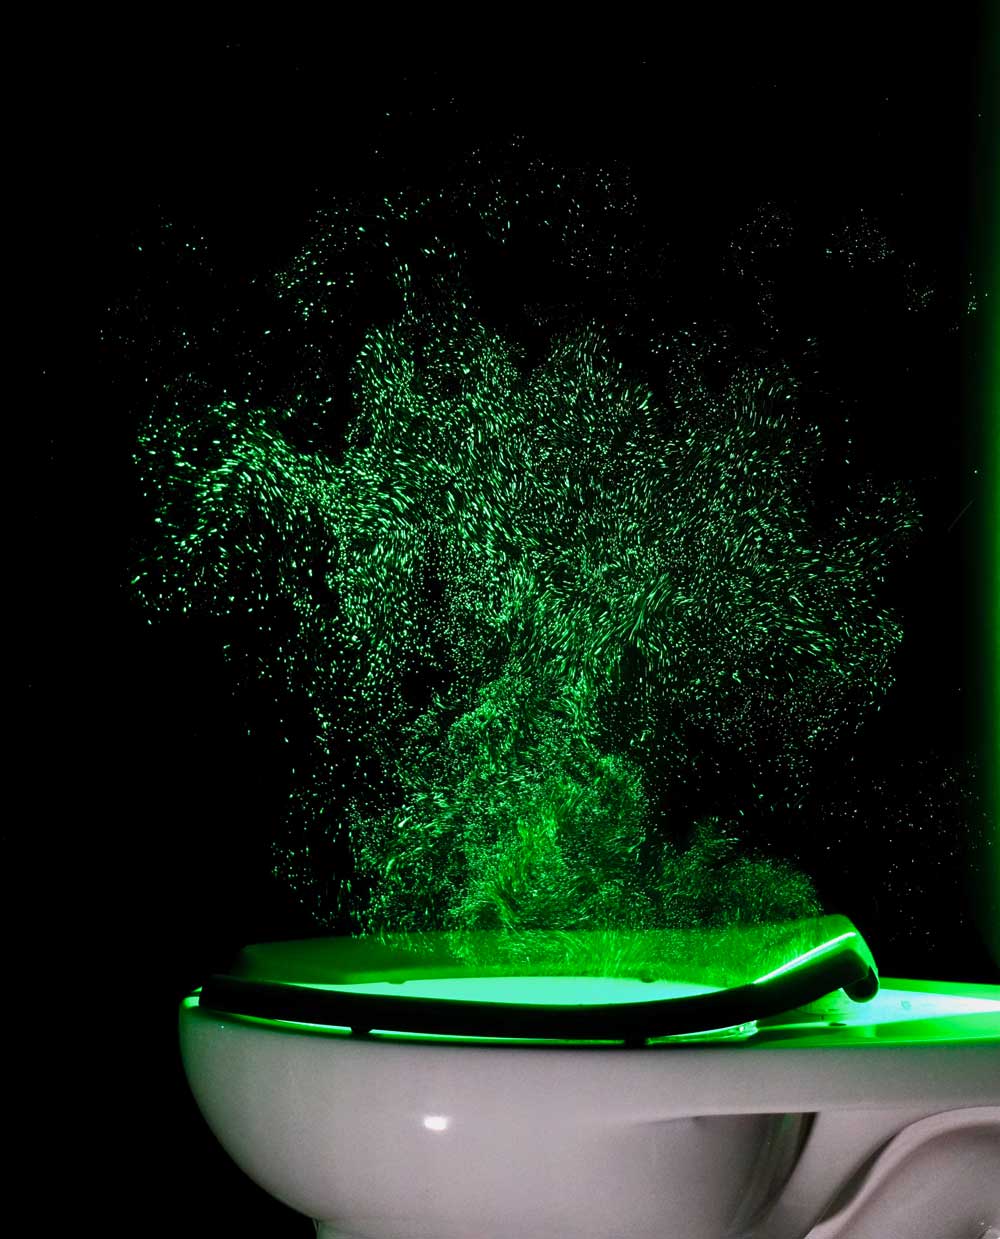 Aerosol plumes from commercial toilets can rise 5 feet above the bowl. John Crimaldi/Scientific Reports, CC BY-NC-ND